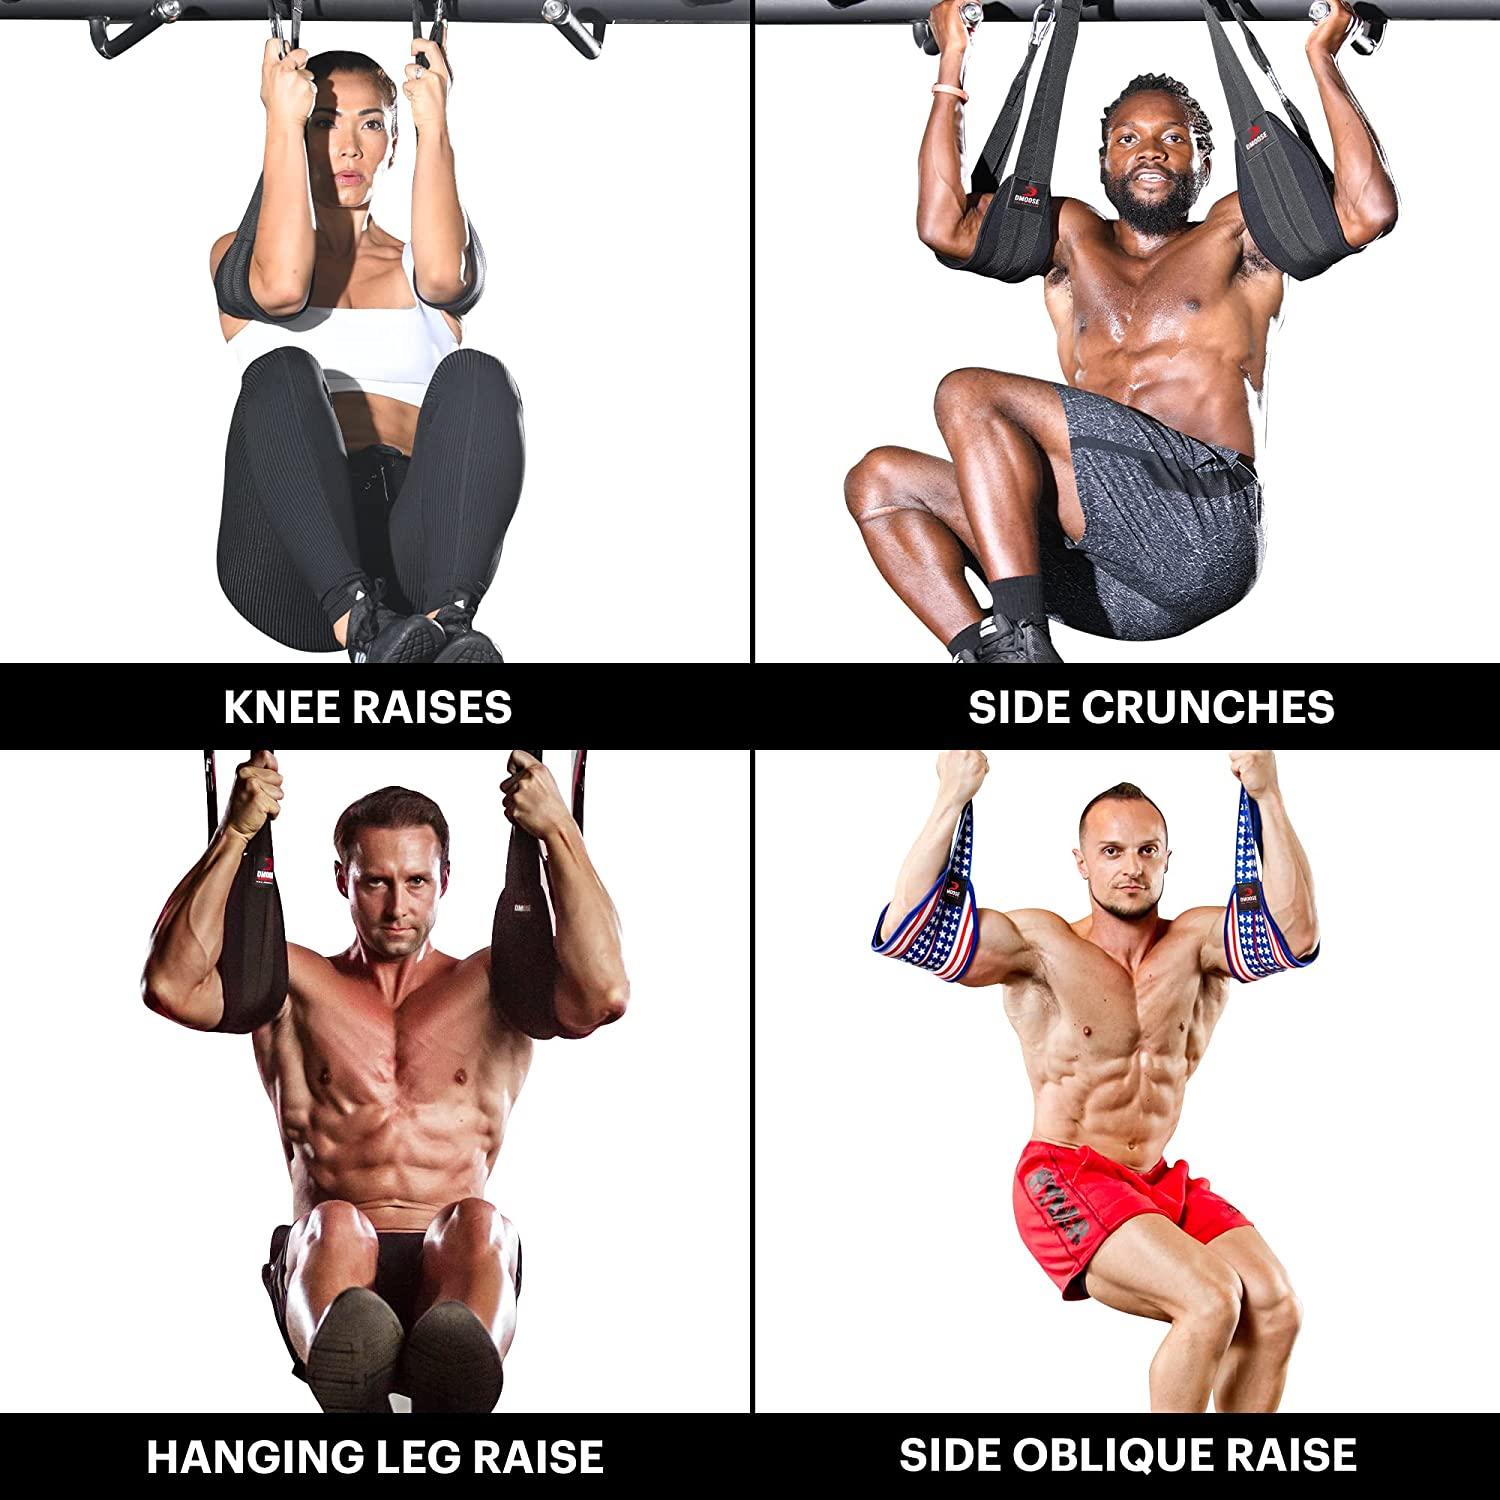 Strengthen Your Core with the 8 Best Ab Roller Exercises Now – DMoose